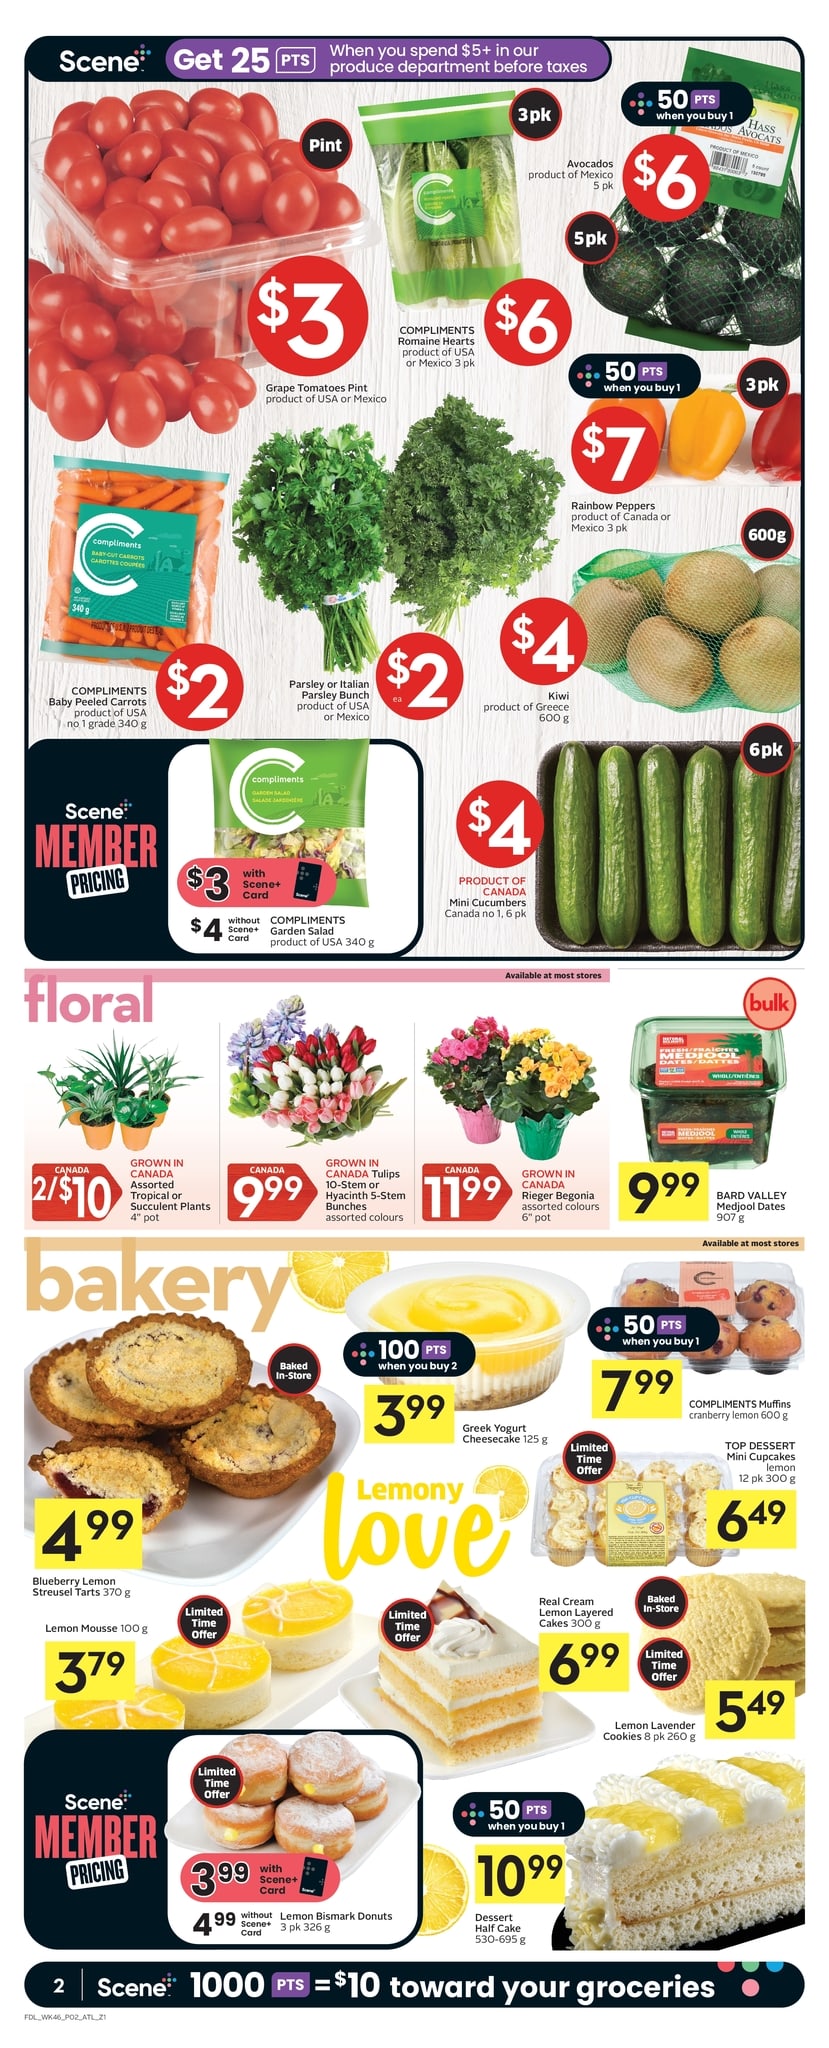 Foodland - New Brunswick - Weekly Flyer Specials - Page 2